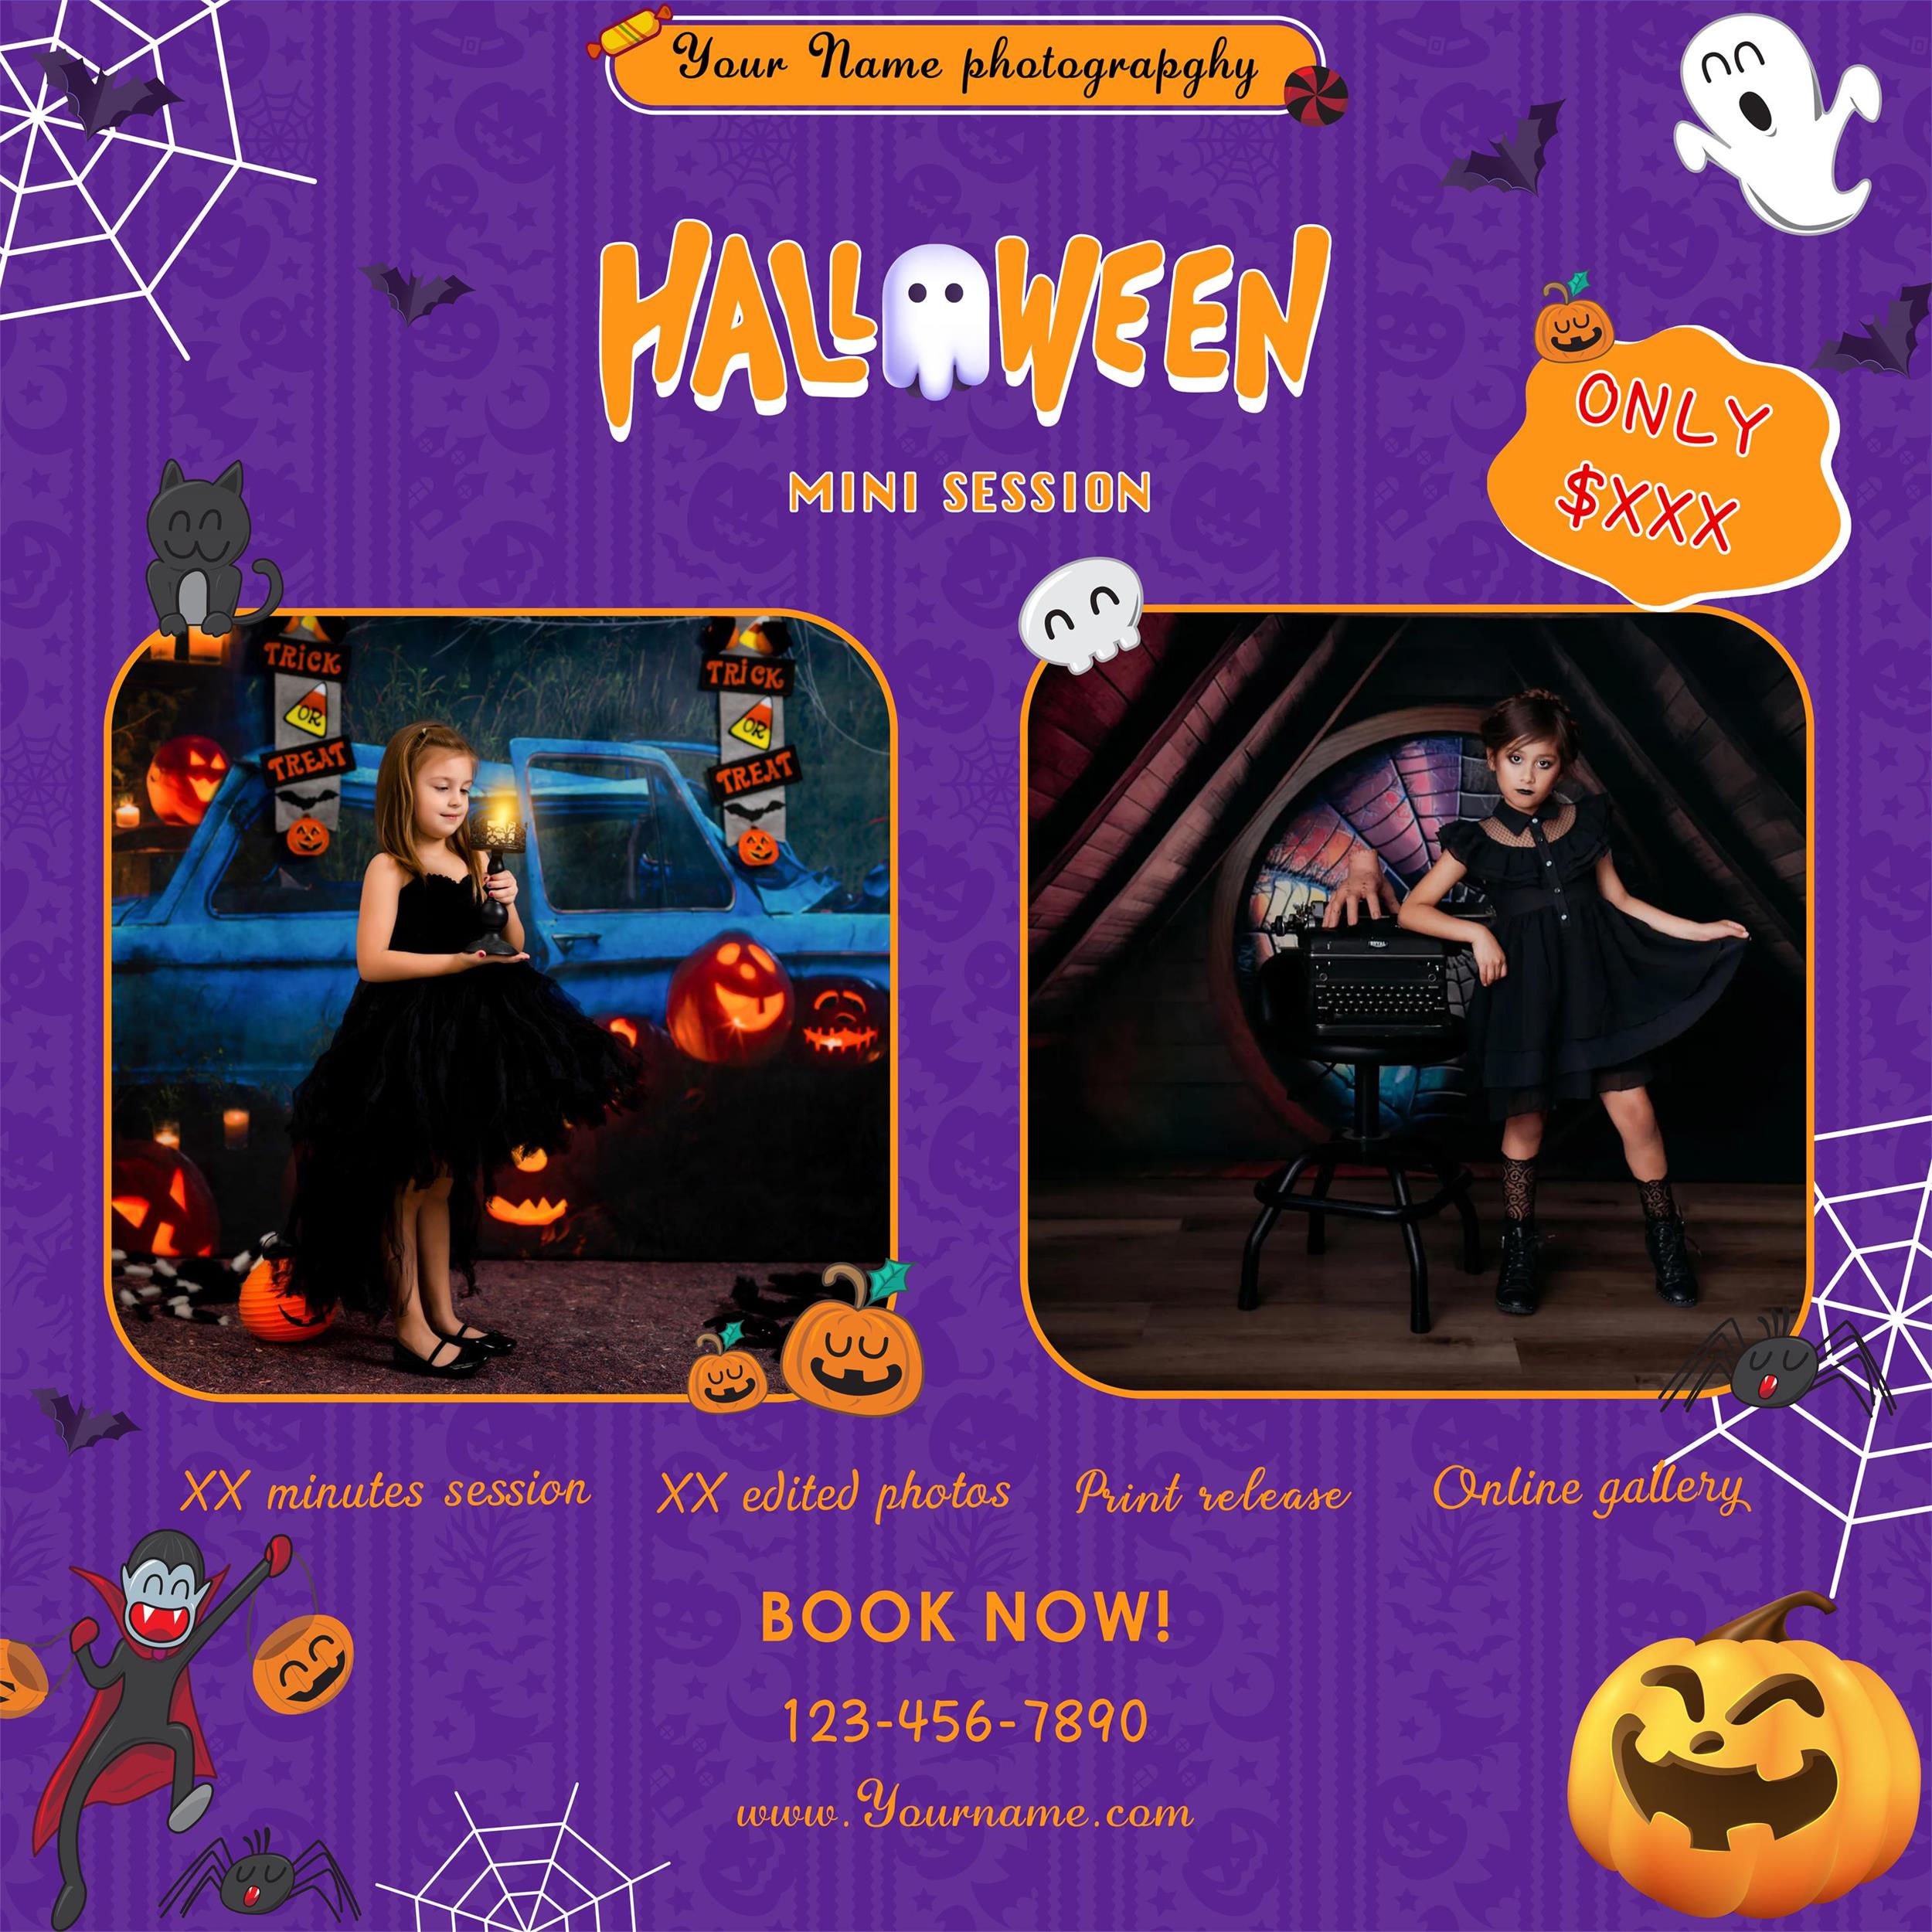 Kate Halloween Mini Session Template For Photographers